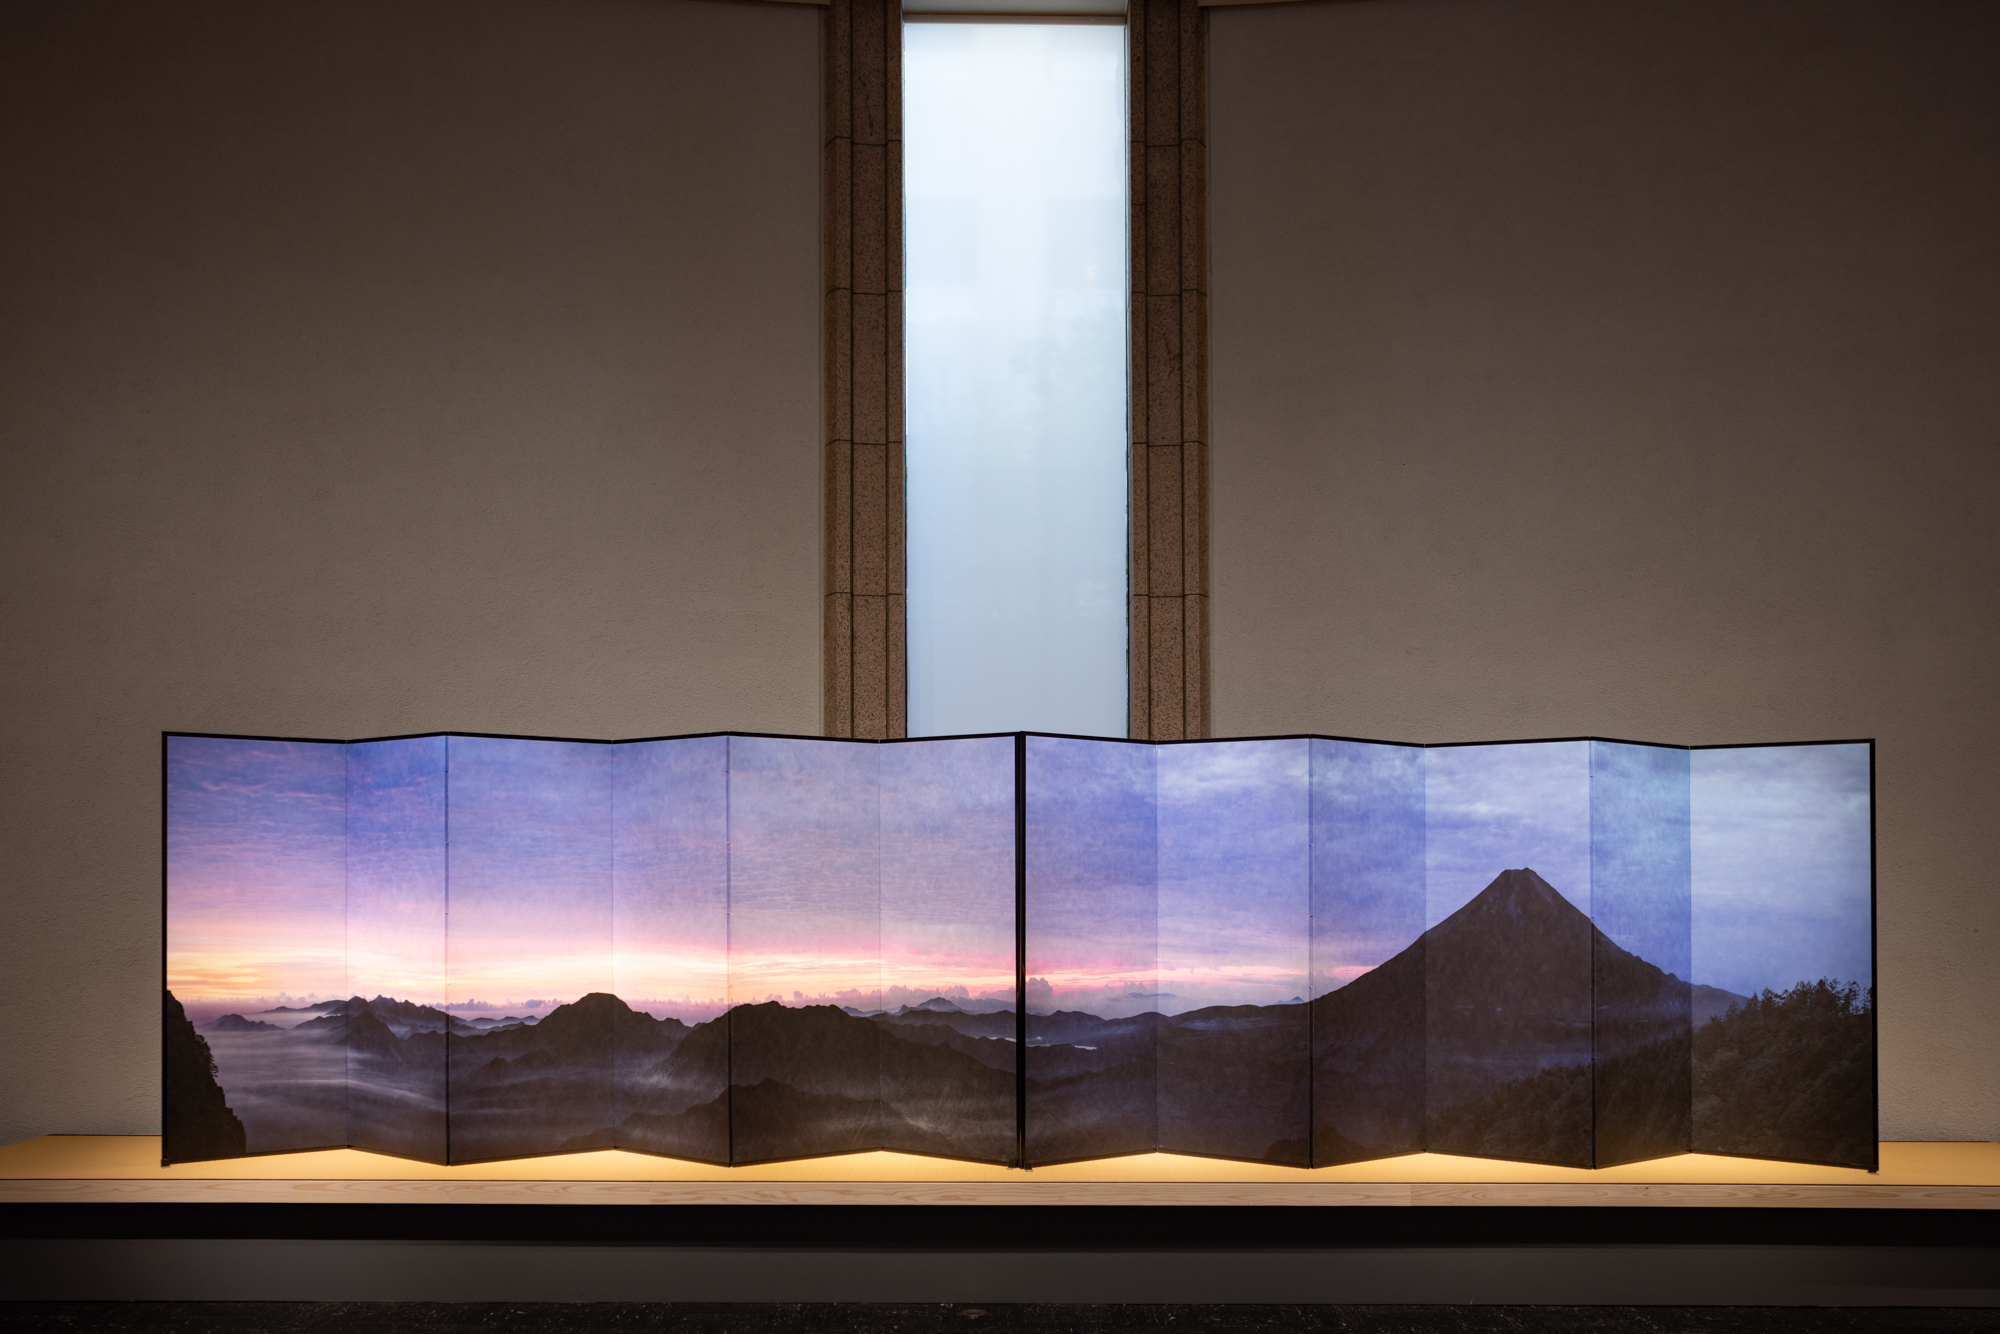 Installation view of a color photograph featuring a Mt. Fuji mounted on a folding screen